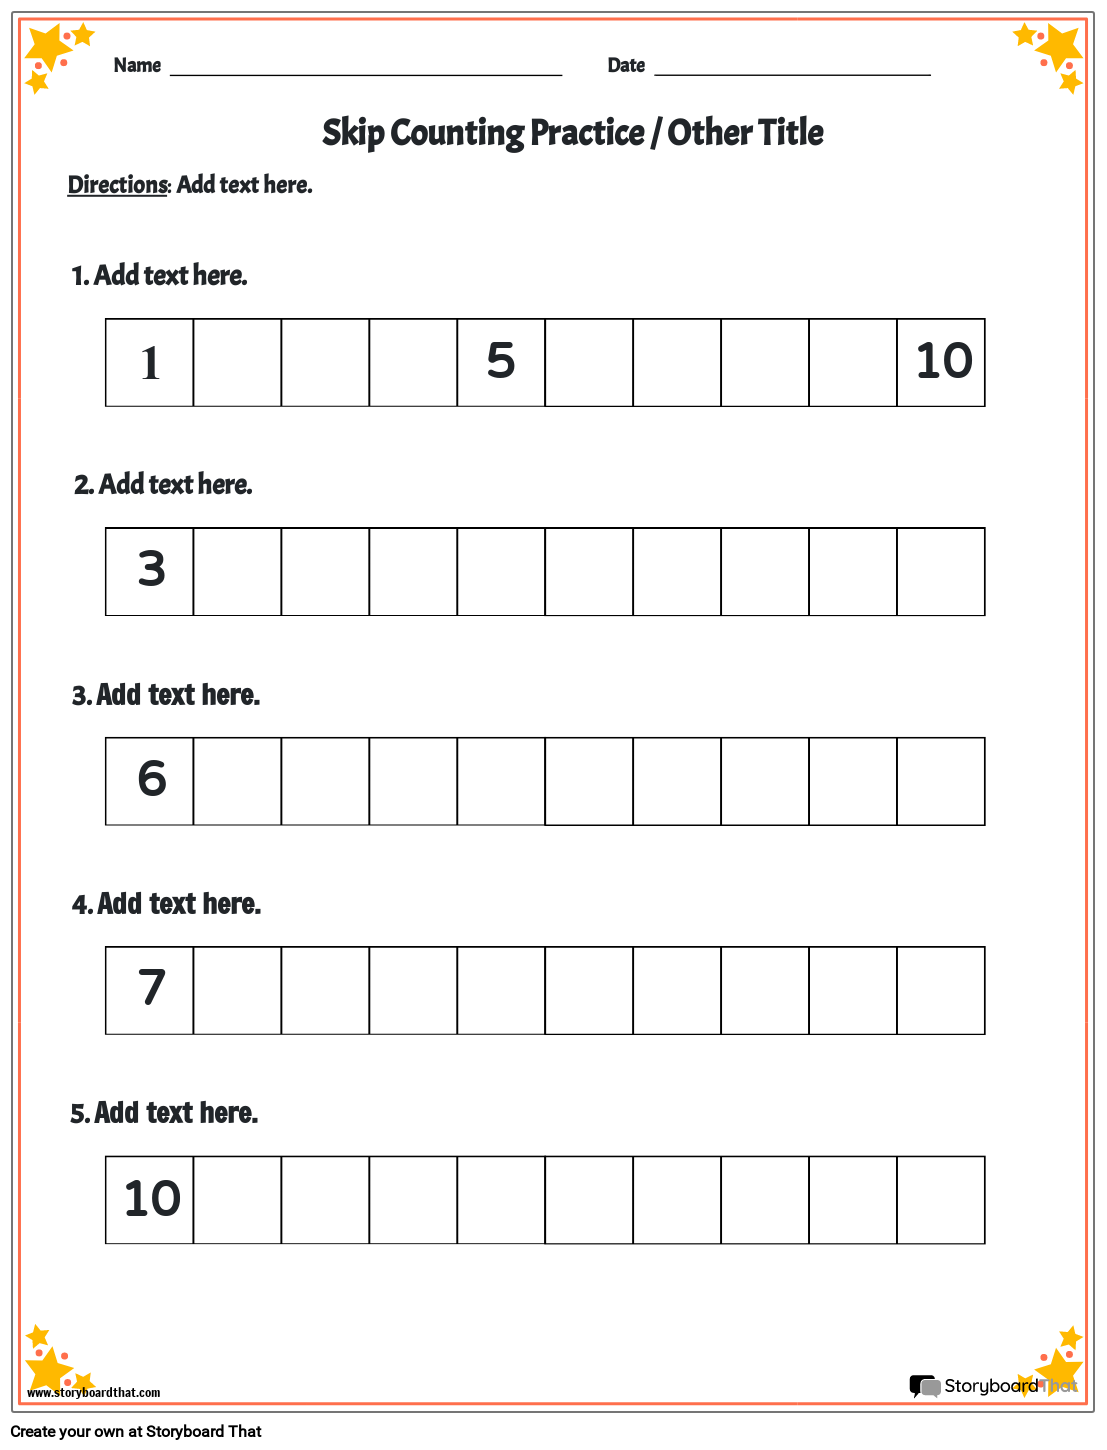 Skip Counting Worksheet with Star Border